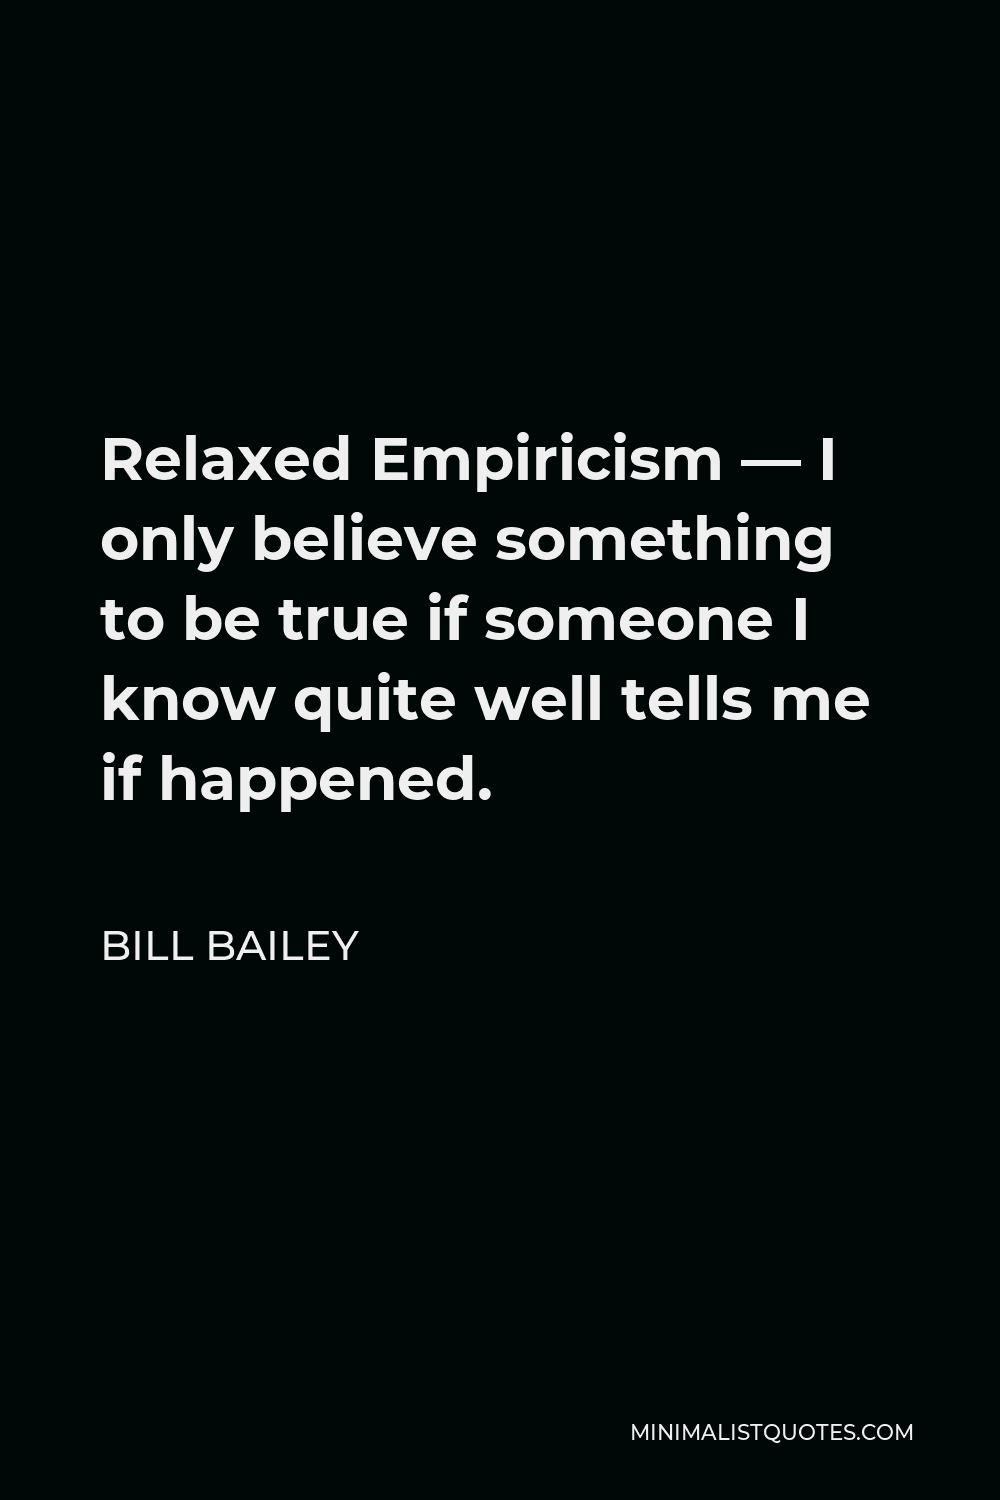 Bill Bailey Quote - Relaxed Empiricism — I only believe something to be true if someone I know quite well tells me if happened.